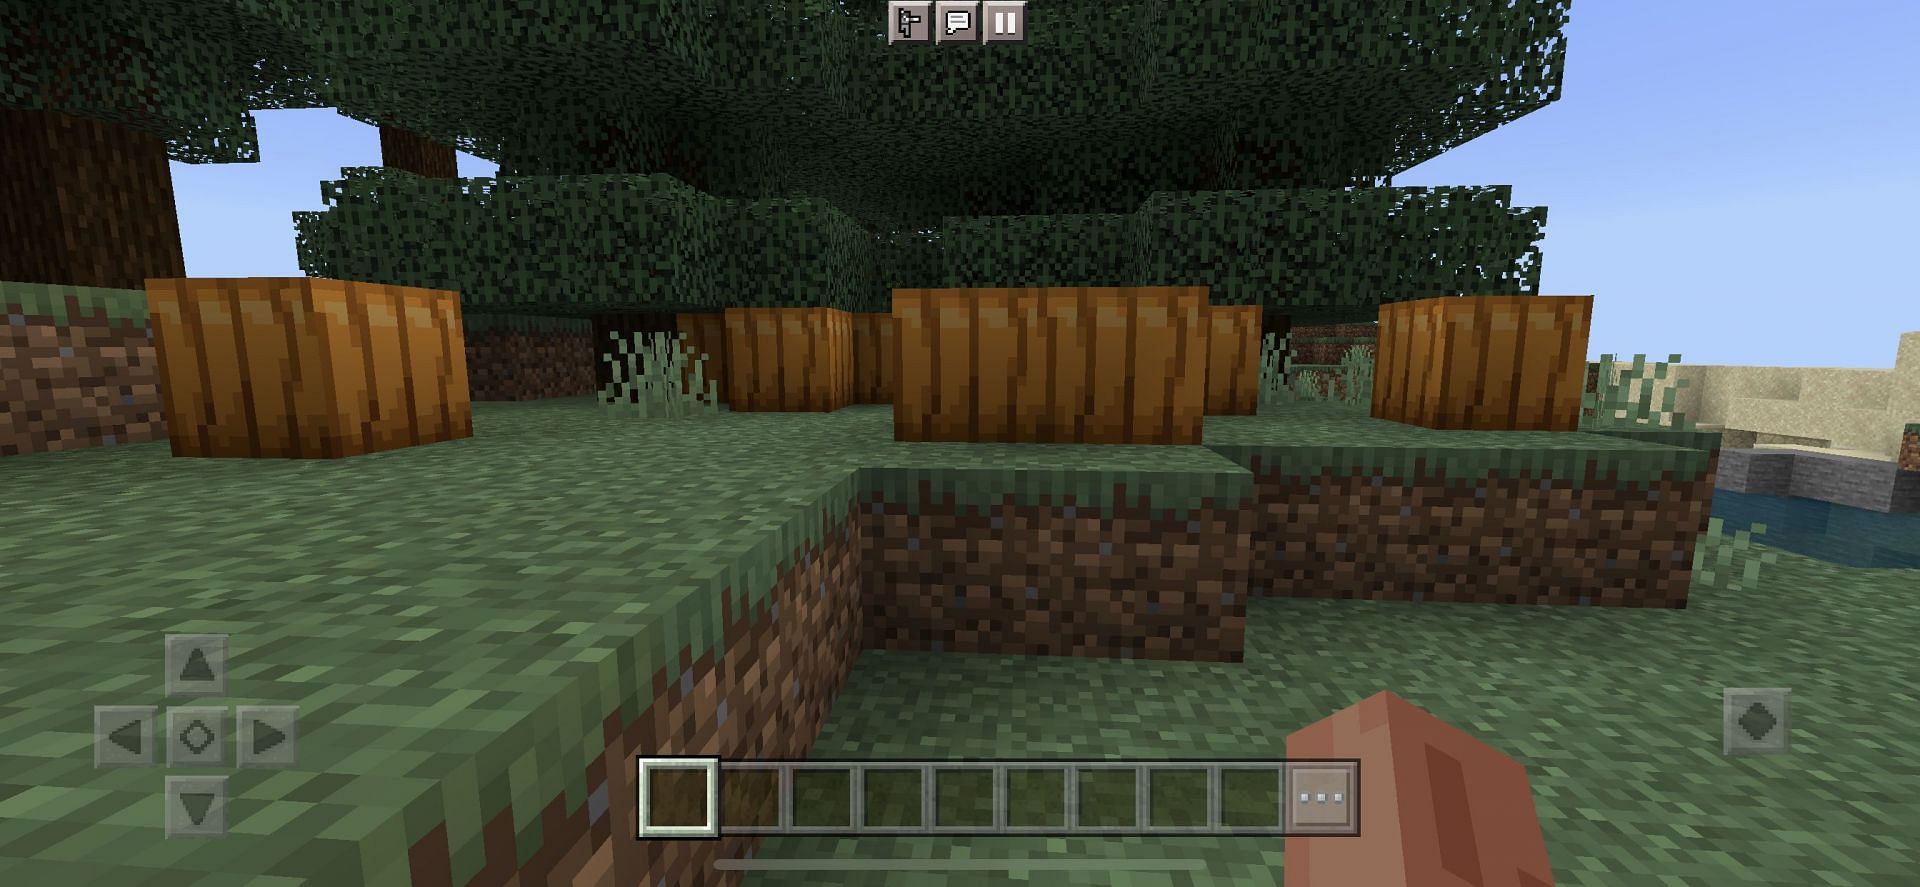 Players can spawn near some pumpkins and locate some nearby lush caves (Image via Minecraft)